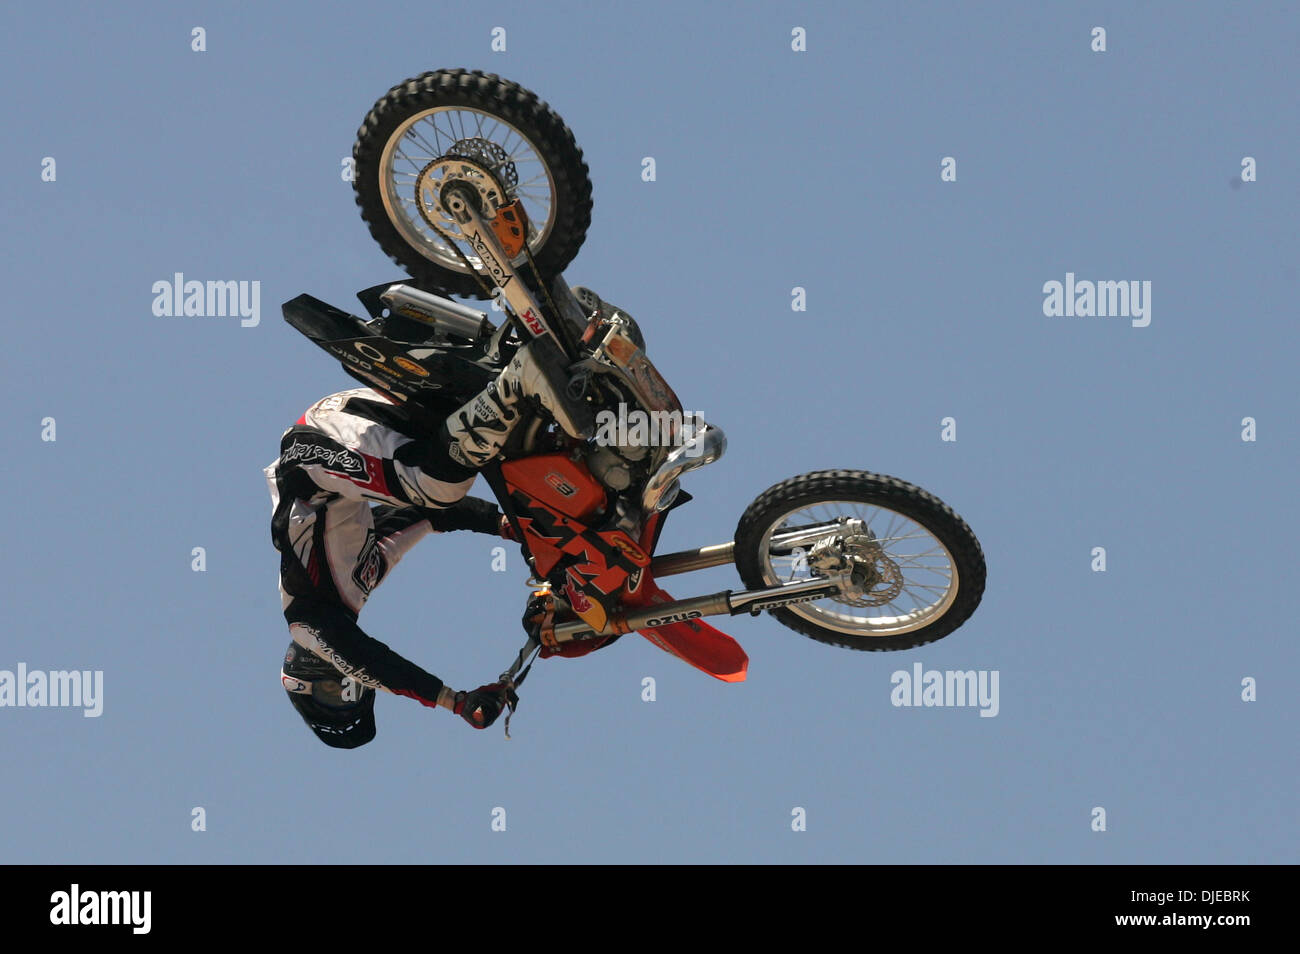 Aug 01, 2004; Huntington Beach, CA, USA; MOTO X stunt Rider RONNIE RENNER  on his dirt jumping KTM Enduro motocross motorcycle. Extreme sports are  attracting more crowds with events like 'X Games'.